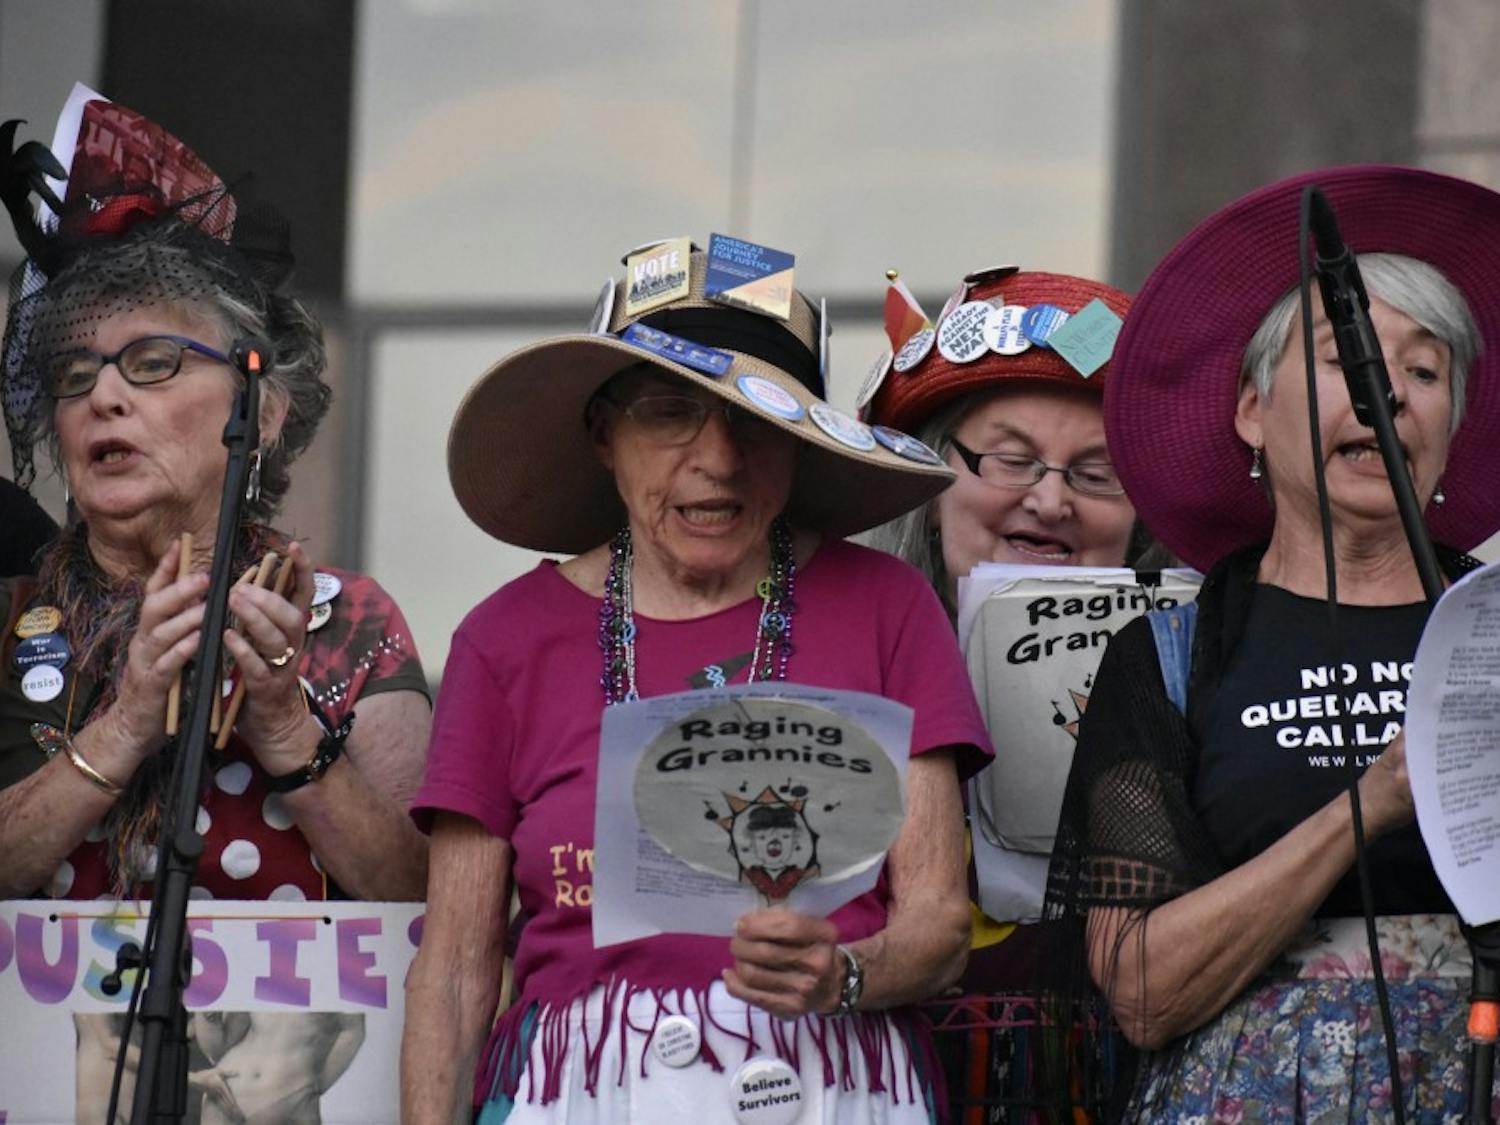 Ruth Zalph, 88, has resently been arrested four times for demonstrations in Washington D.C. and was almost unable to attend Thursday's Stop Kavanaugh protest because of her most recent arrest. Zalph is a part of a group named the Raging Grannies who sing songs for women's rights.&nbsp;